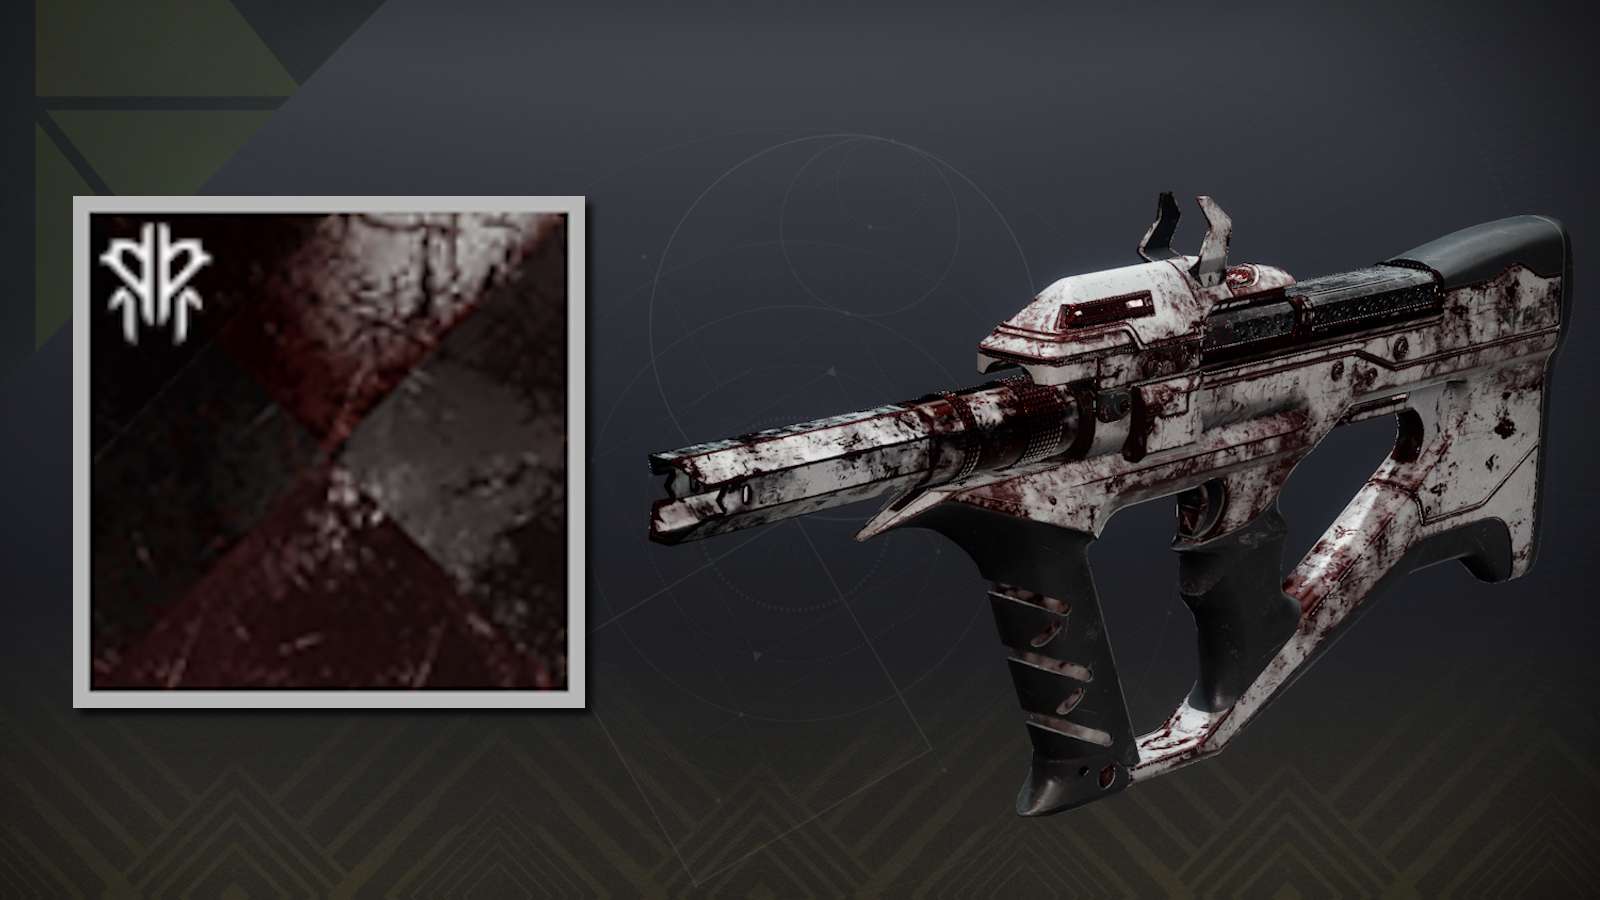 Scarlet Semblance shader ahd shader preview on Prolonged Engagement SMG in Destiny 2.